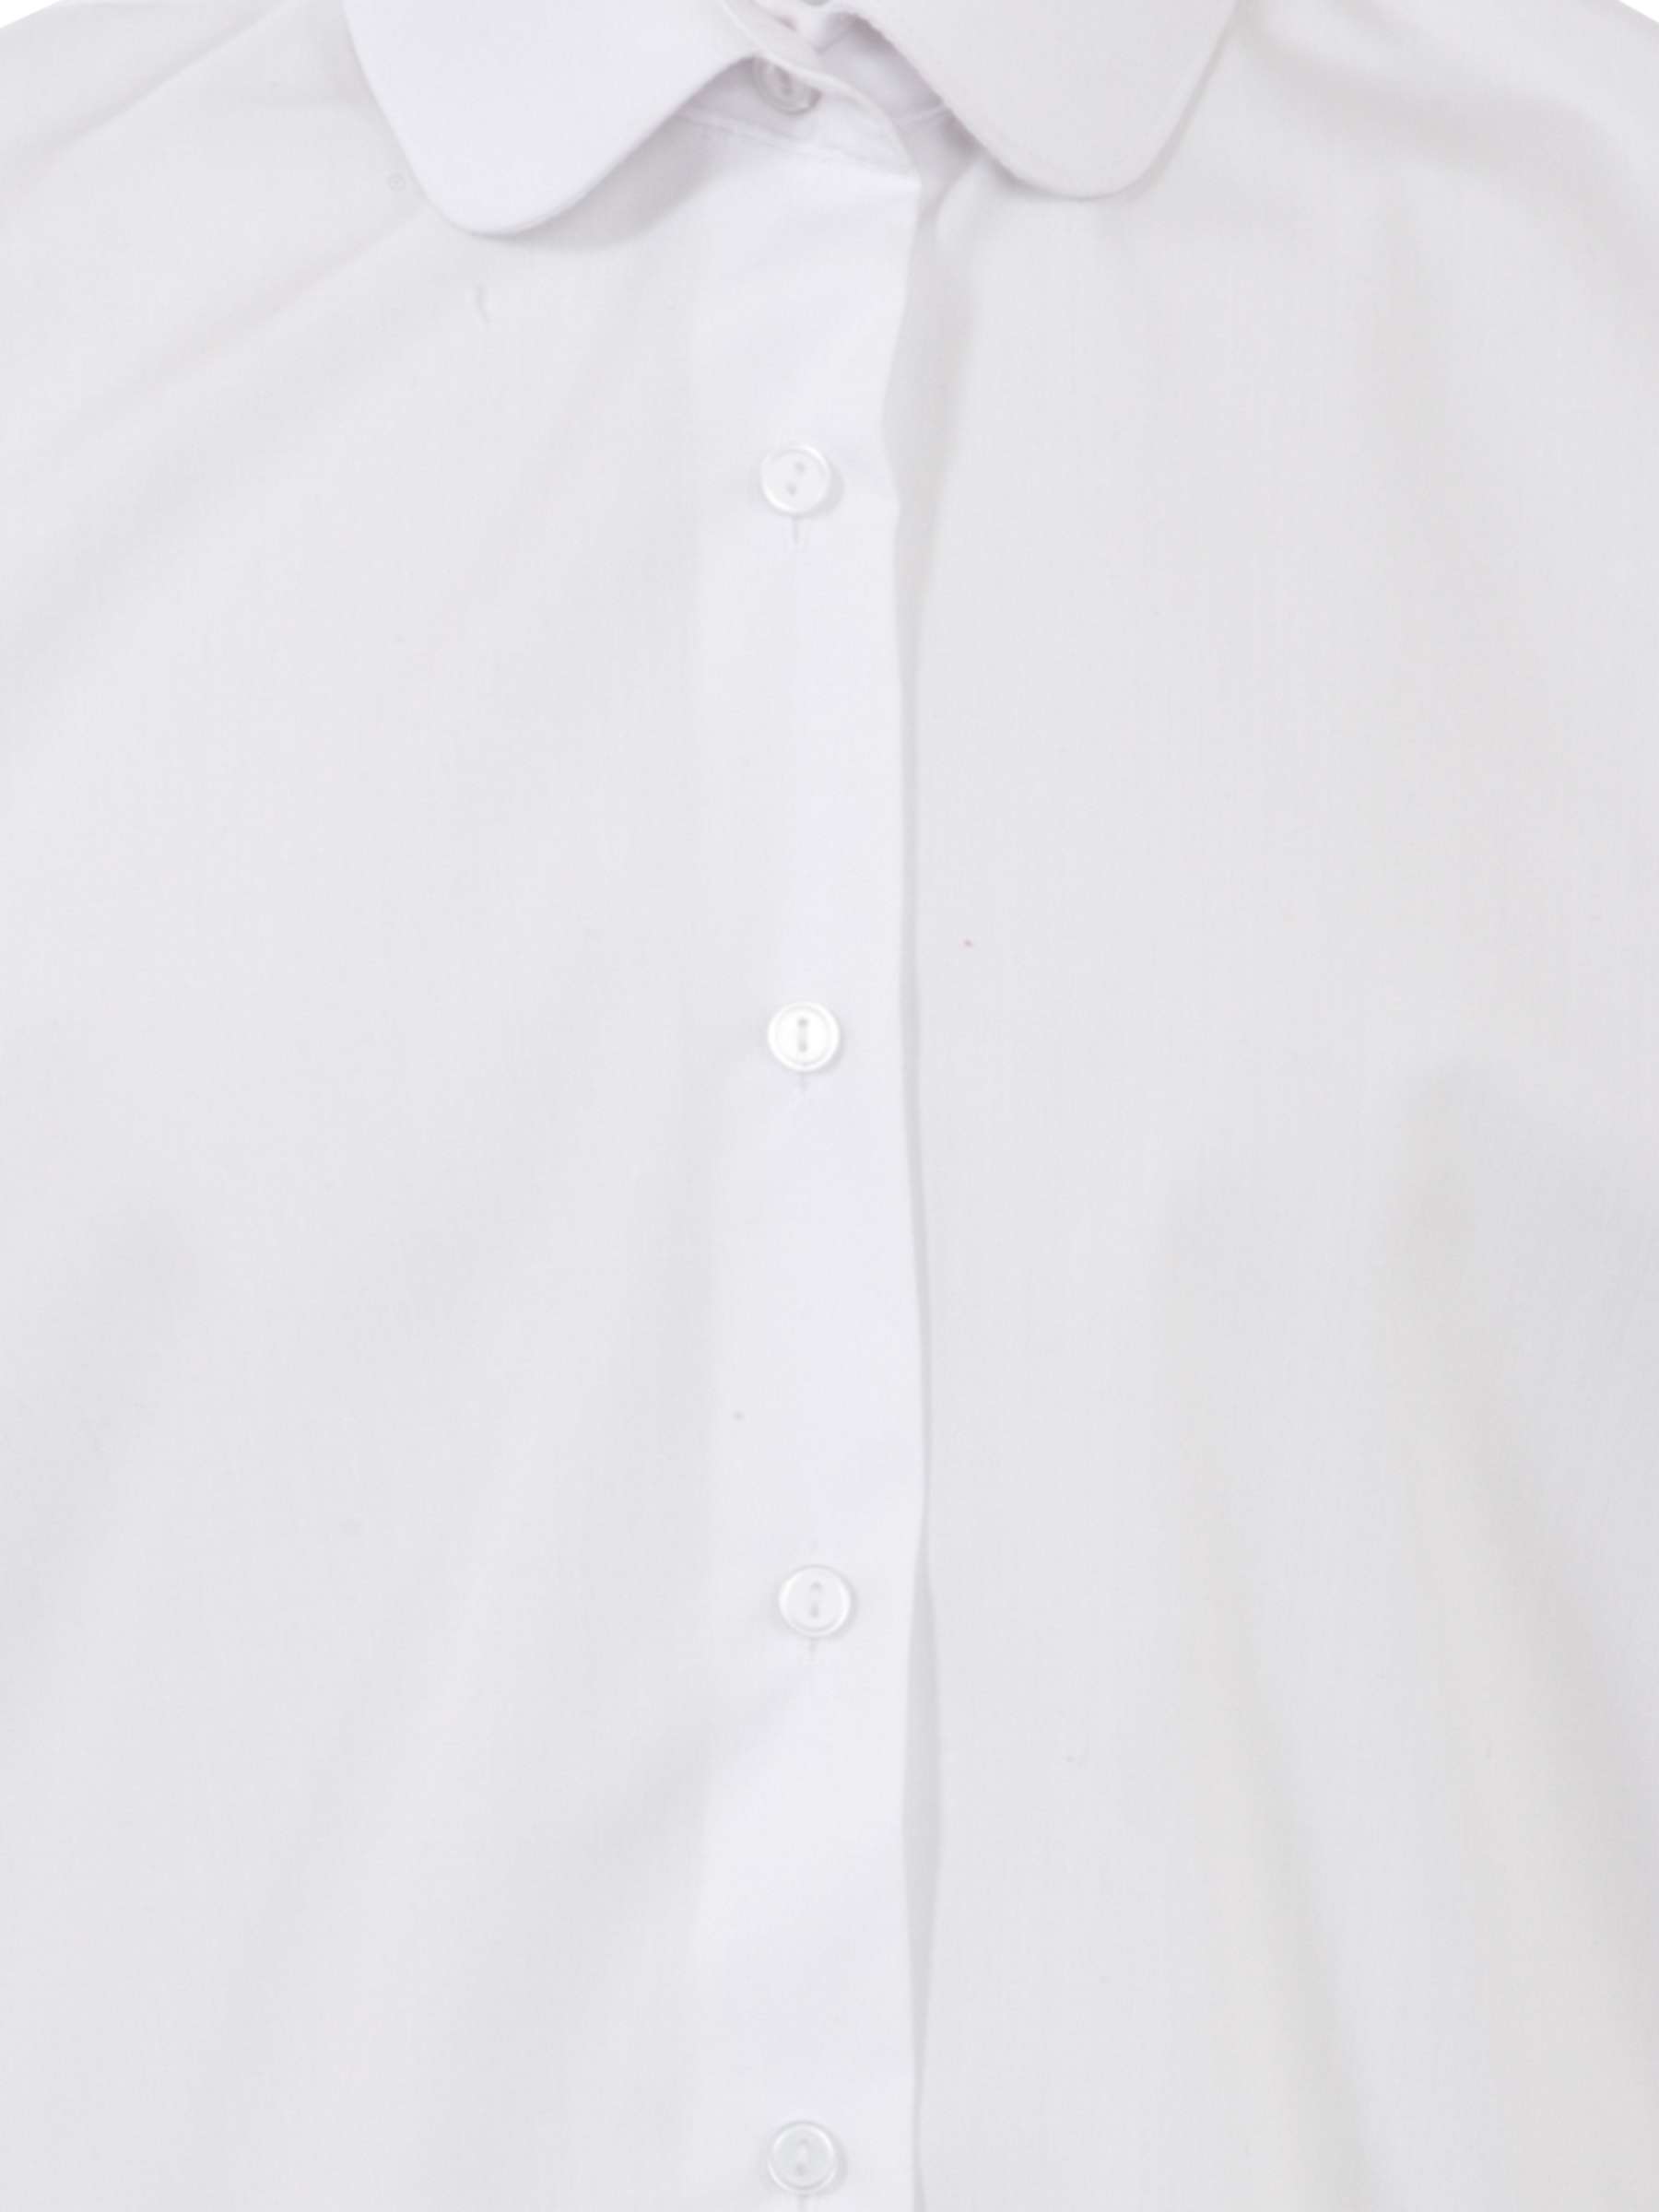 Buy Girls' School Round Collar Blouse, Pack of 2, White Online at johnlewis.com